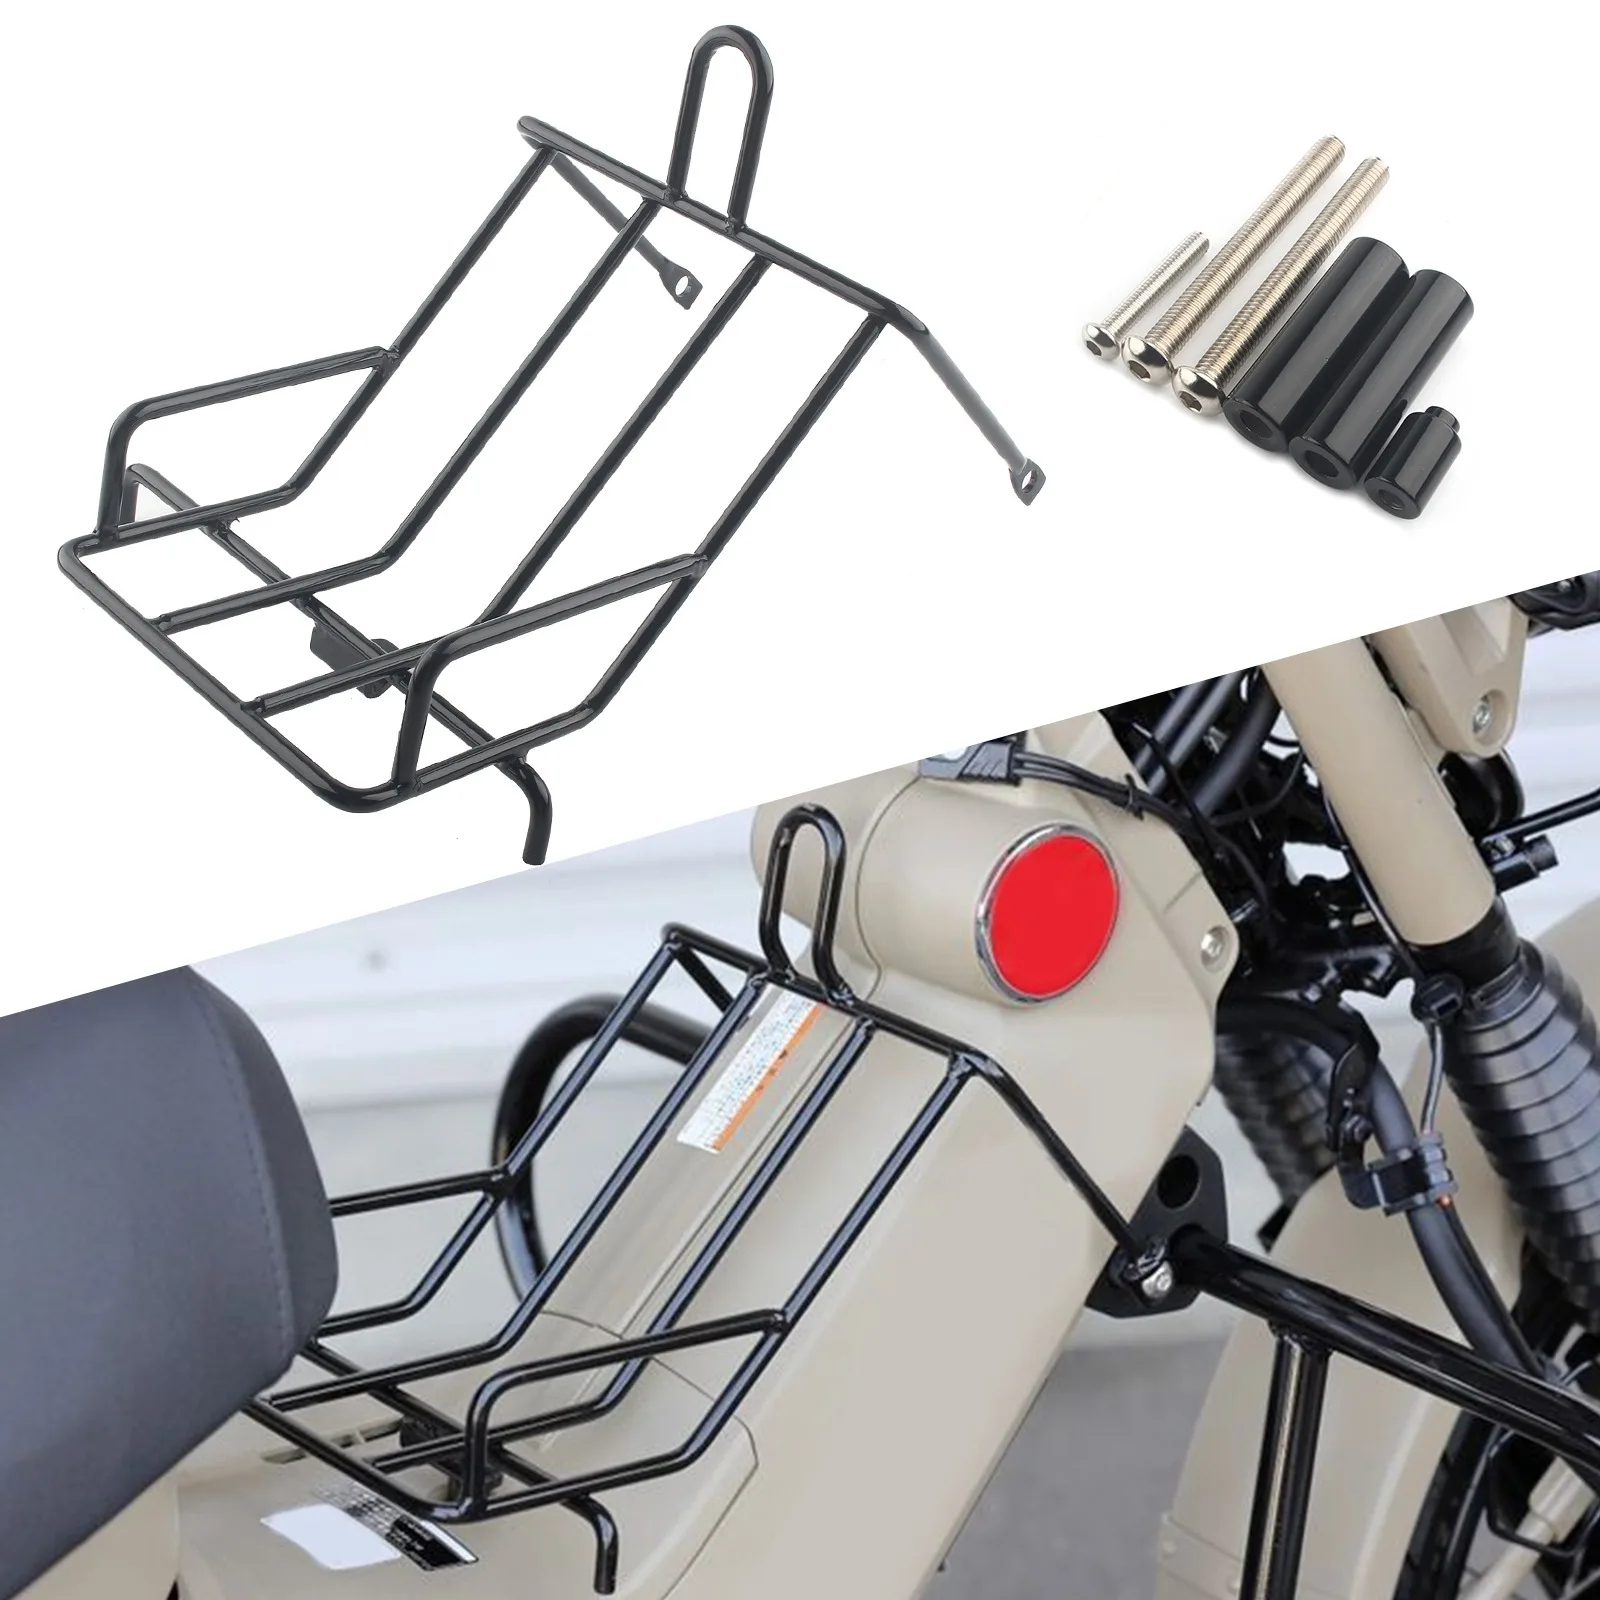 

Motorcycle Center Rack Box Motocross Mid-shelf Seat Carrier Luggage For Honda CT125 Hunter Cub Trail 125 2020-2023 Modified Part